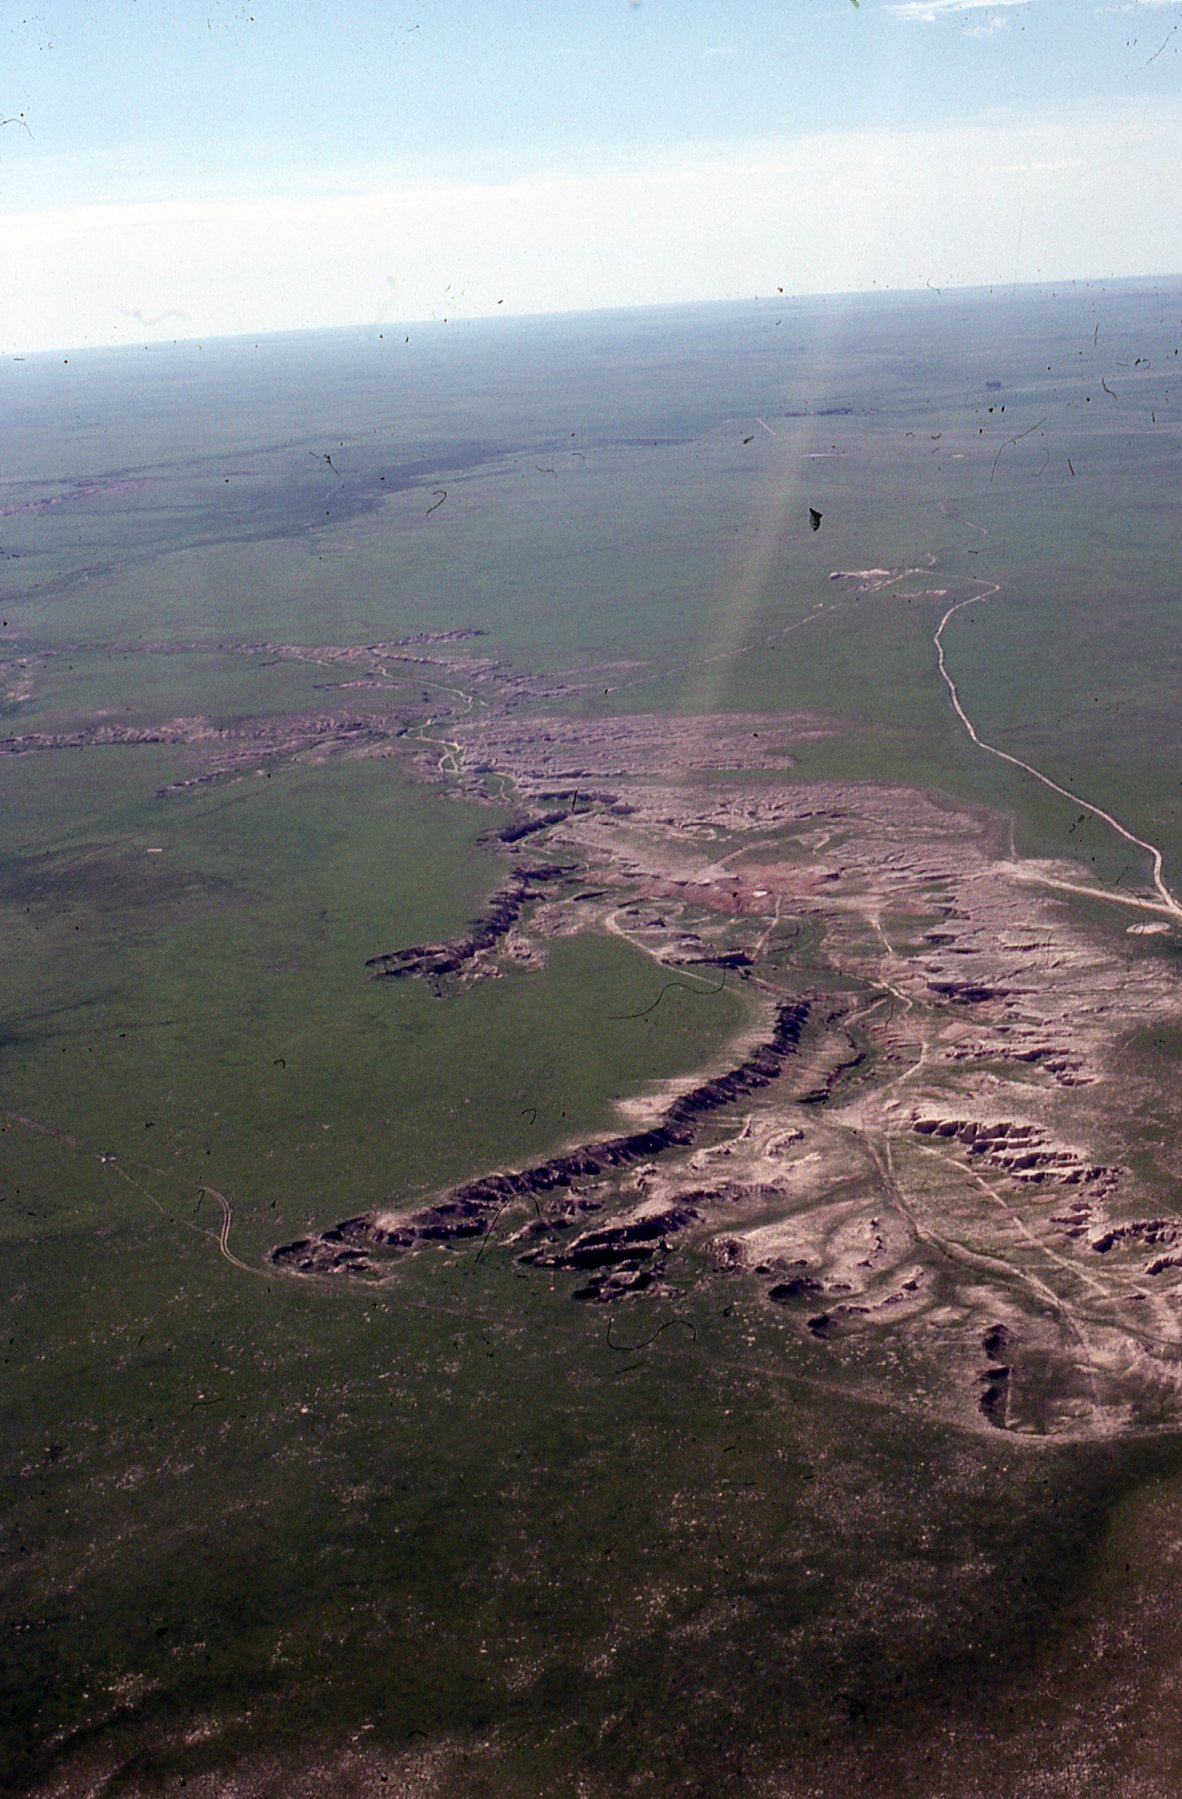 An aeiral image show the grasslands are not just flat terrain.